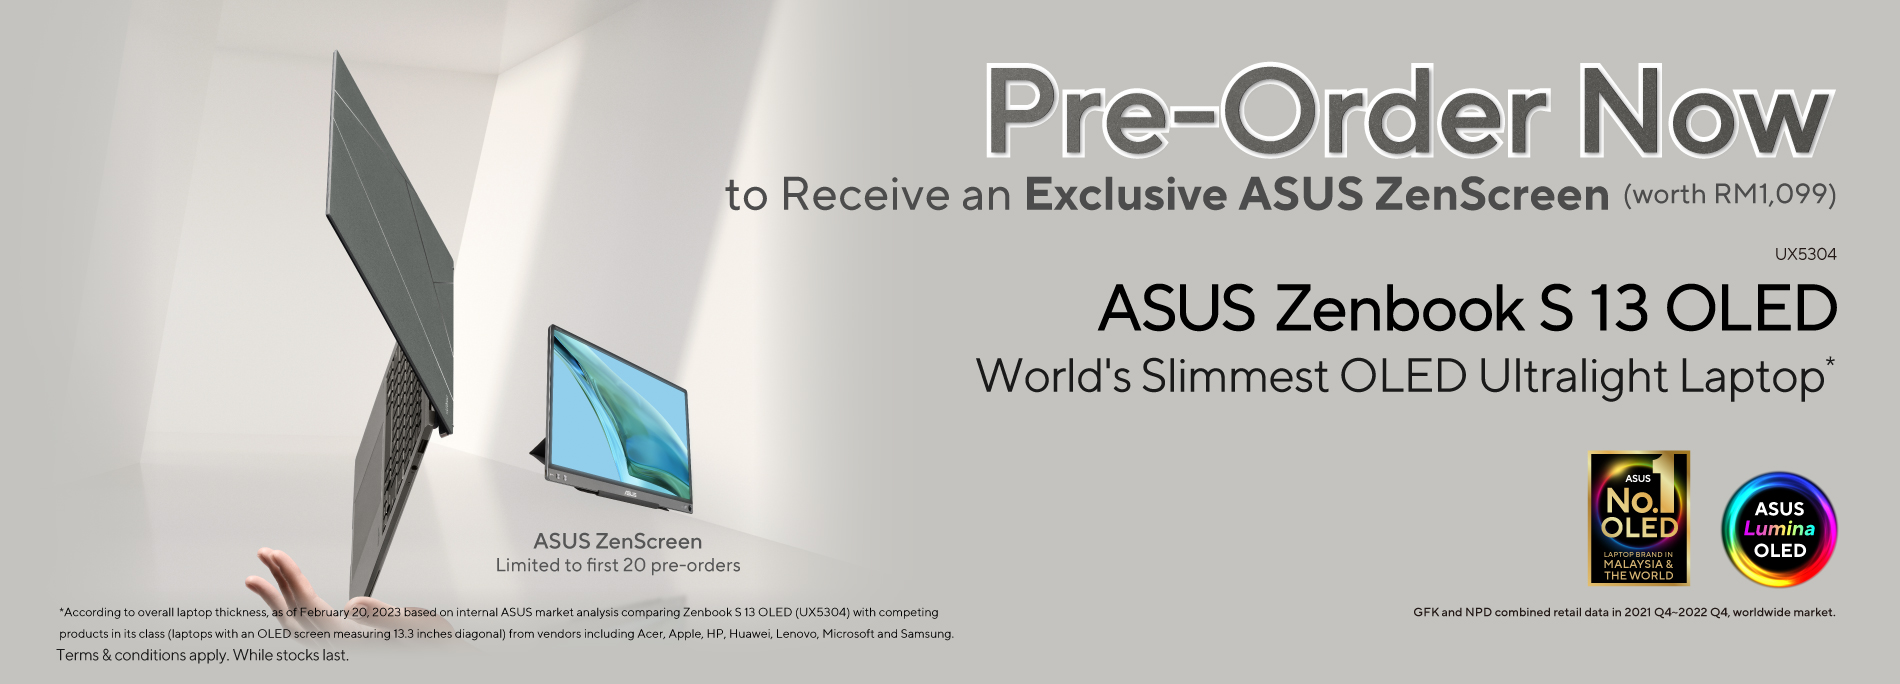 Pre-Order the Most Eco-Friendly Ultraportable ASUS Zenbook S 13 OLED